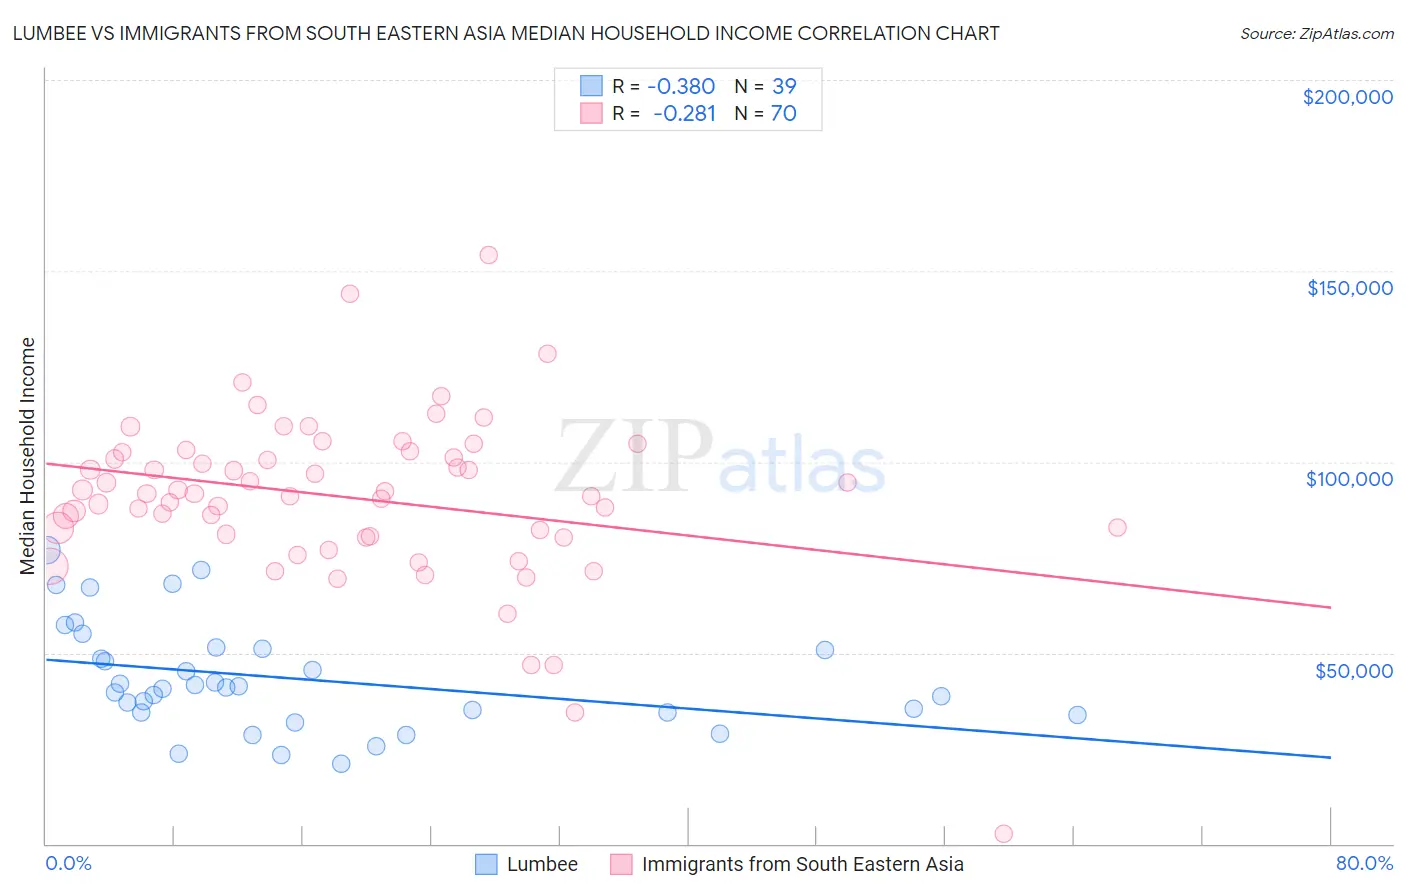 Lumbee vs Immigrants from South Eastern Asia Median Household Income